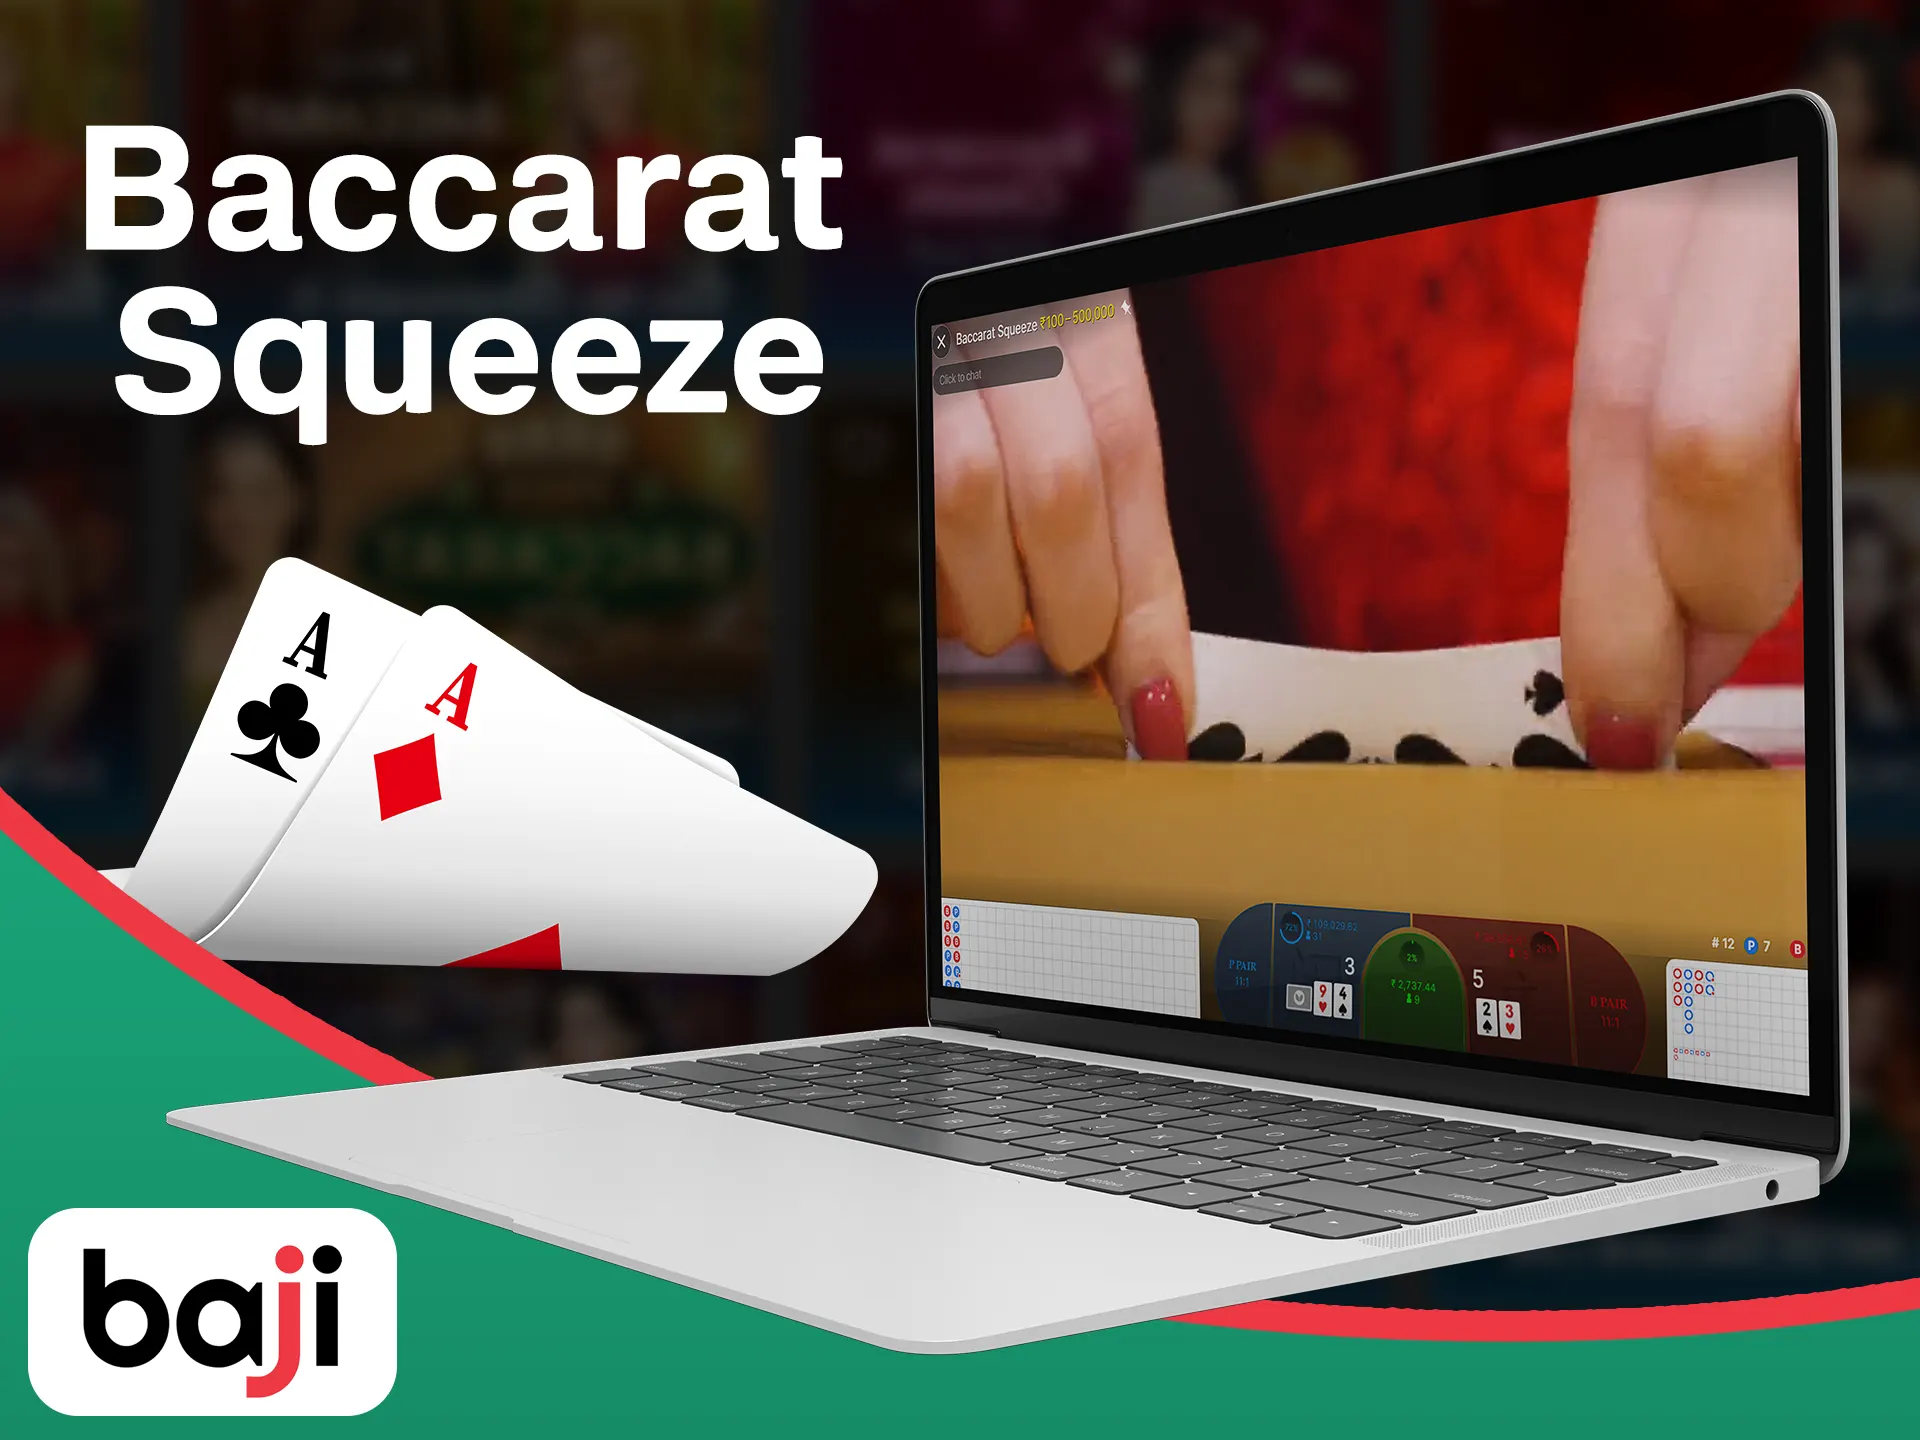 Squeeze your game result with the squeeze version of baccarat.